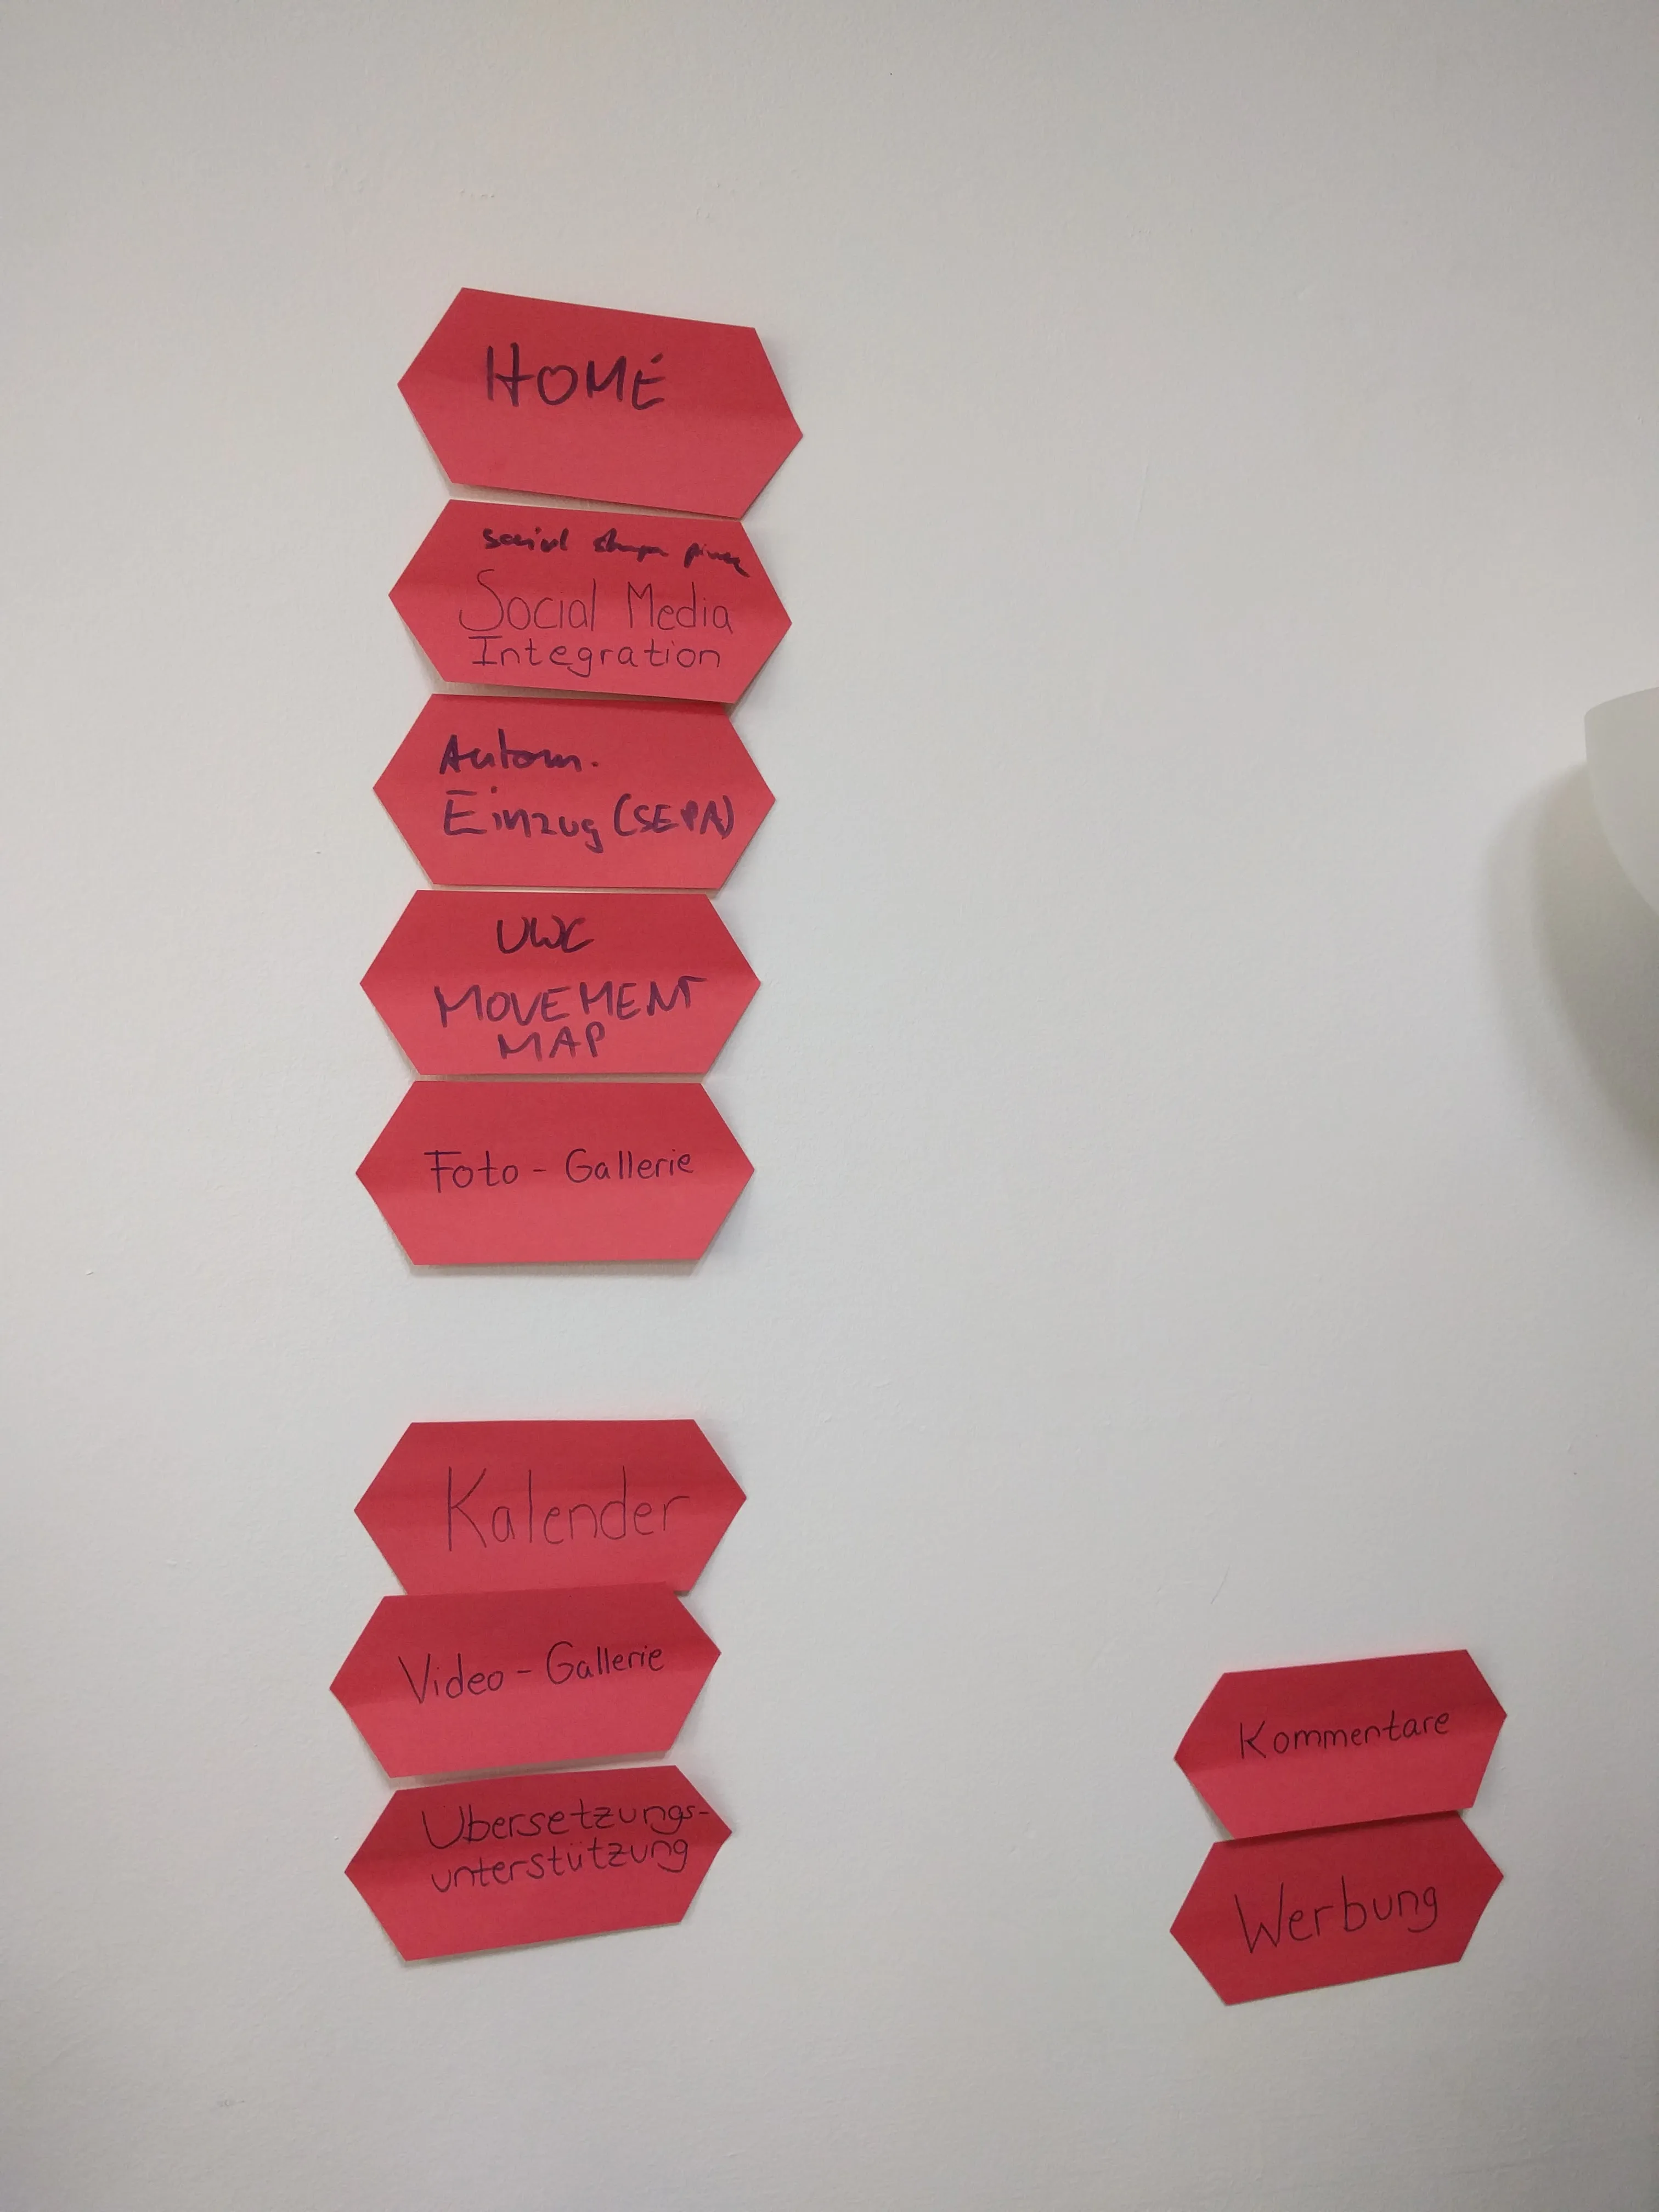 Post-it notes with features written on them hang on a wall